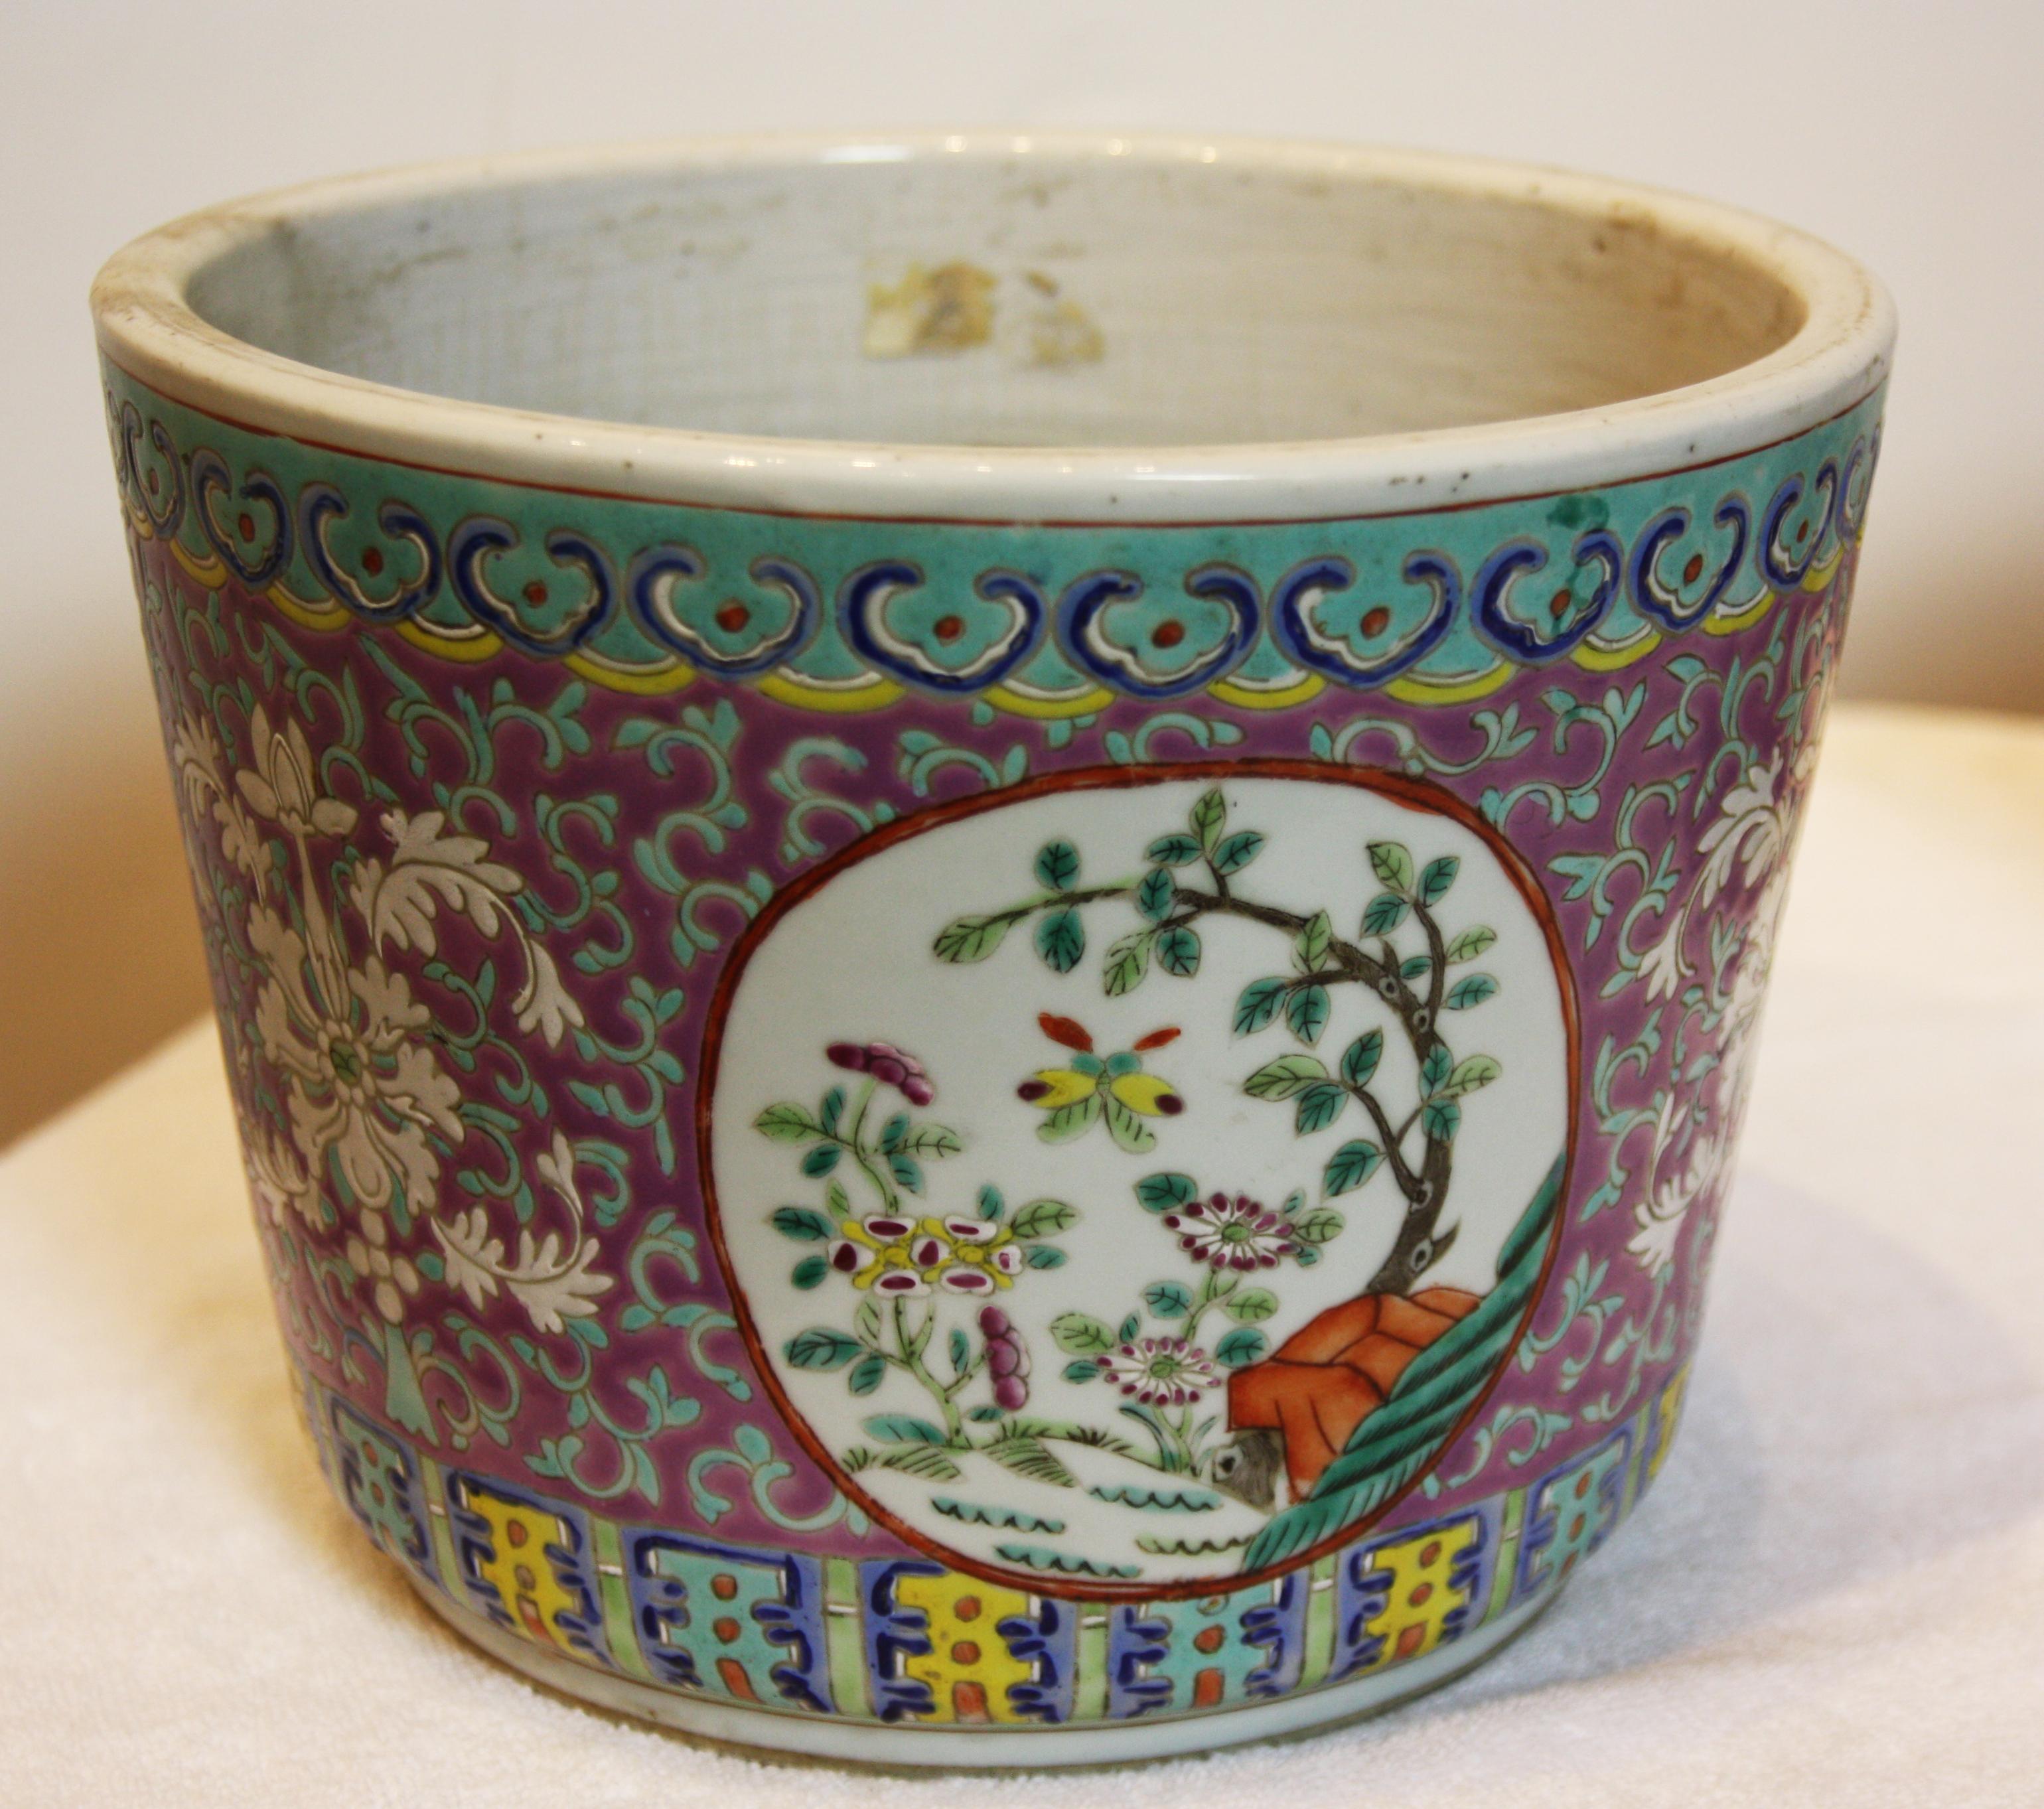 Lovely pair of hand-painted cachepot jardinieres with intricate design work and nature scenery.